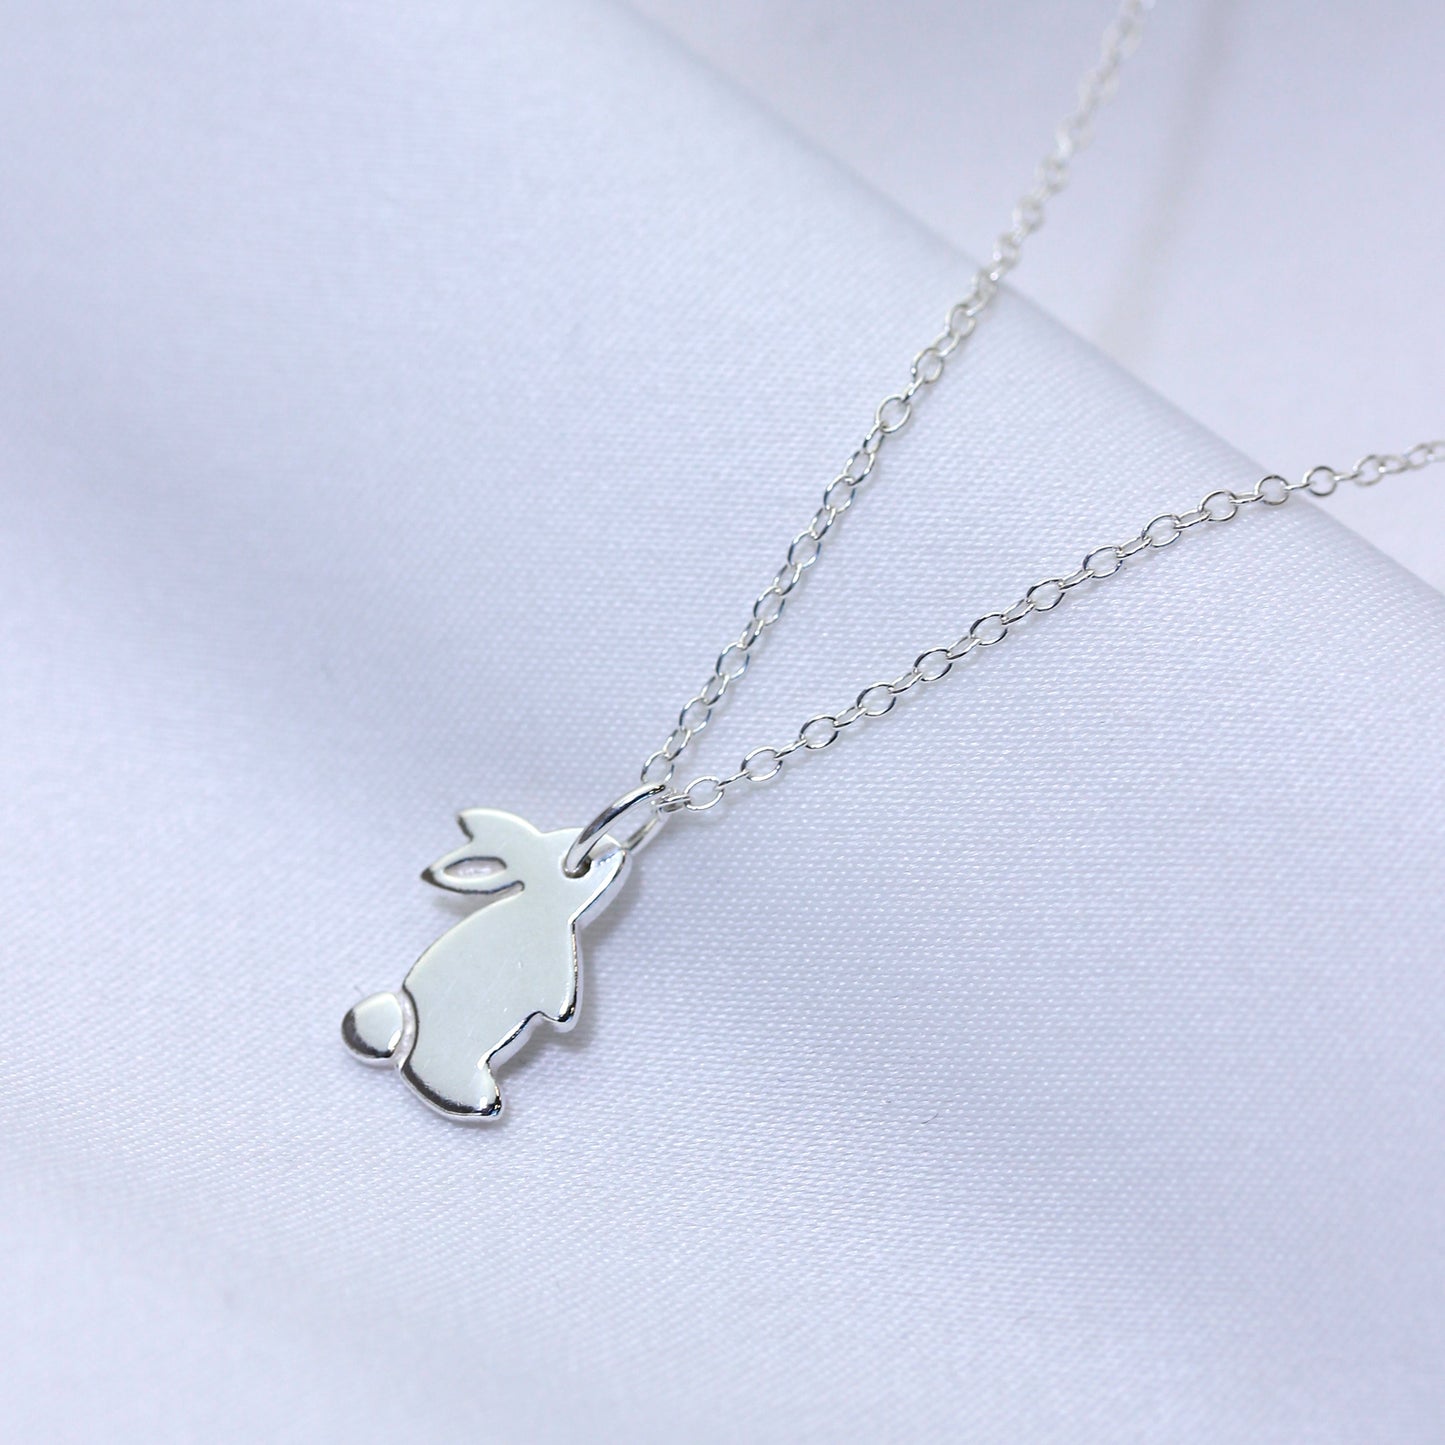 Sterling Silver Flat Rabbit Necklace 14-22 Inches